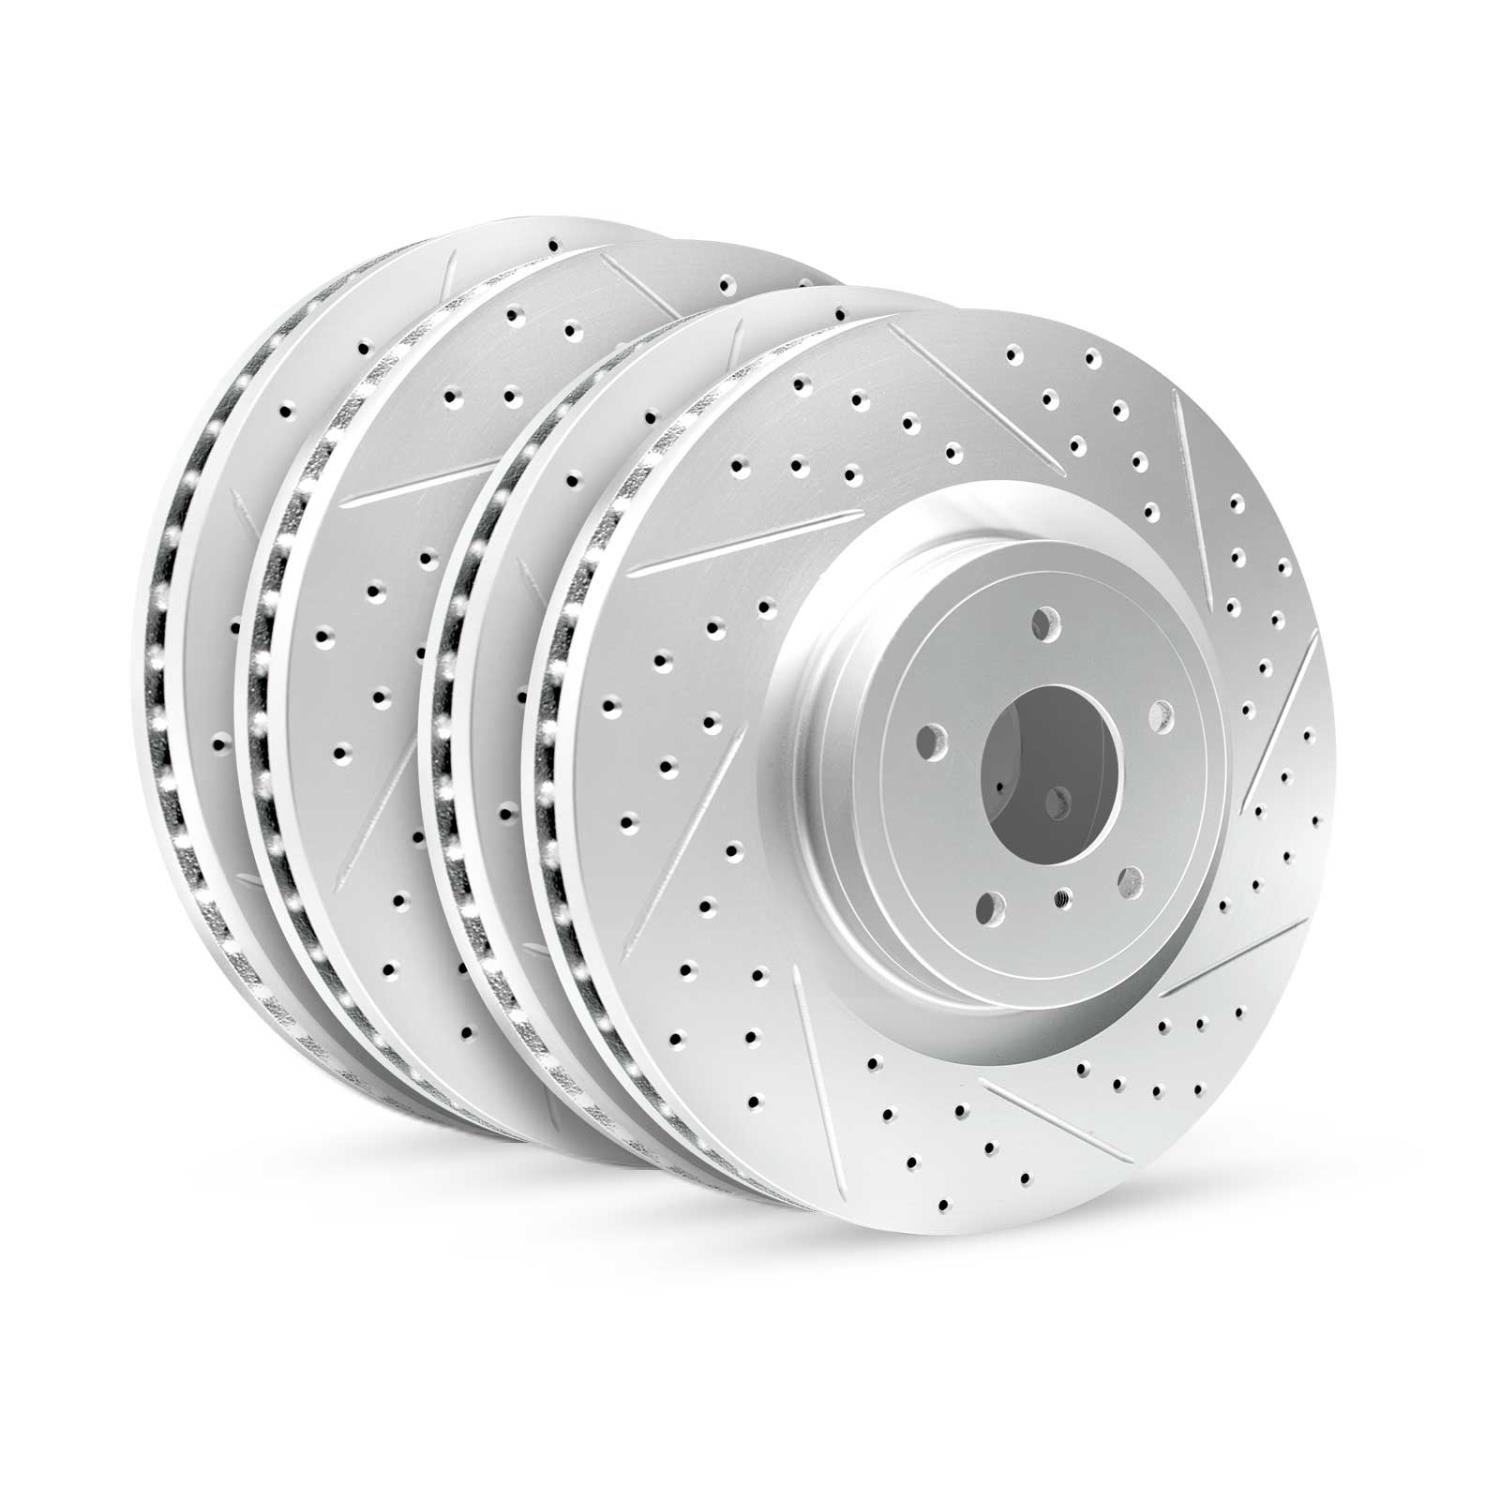 GEO-Carbon Drilled & Slotted Brake Rotor Set, Fits Select Mini, Position: Front & Rear